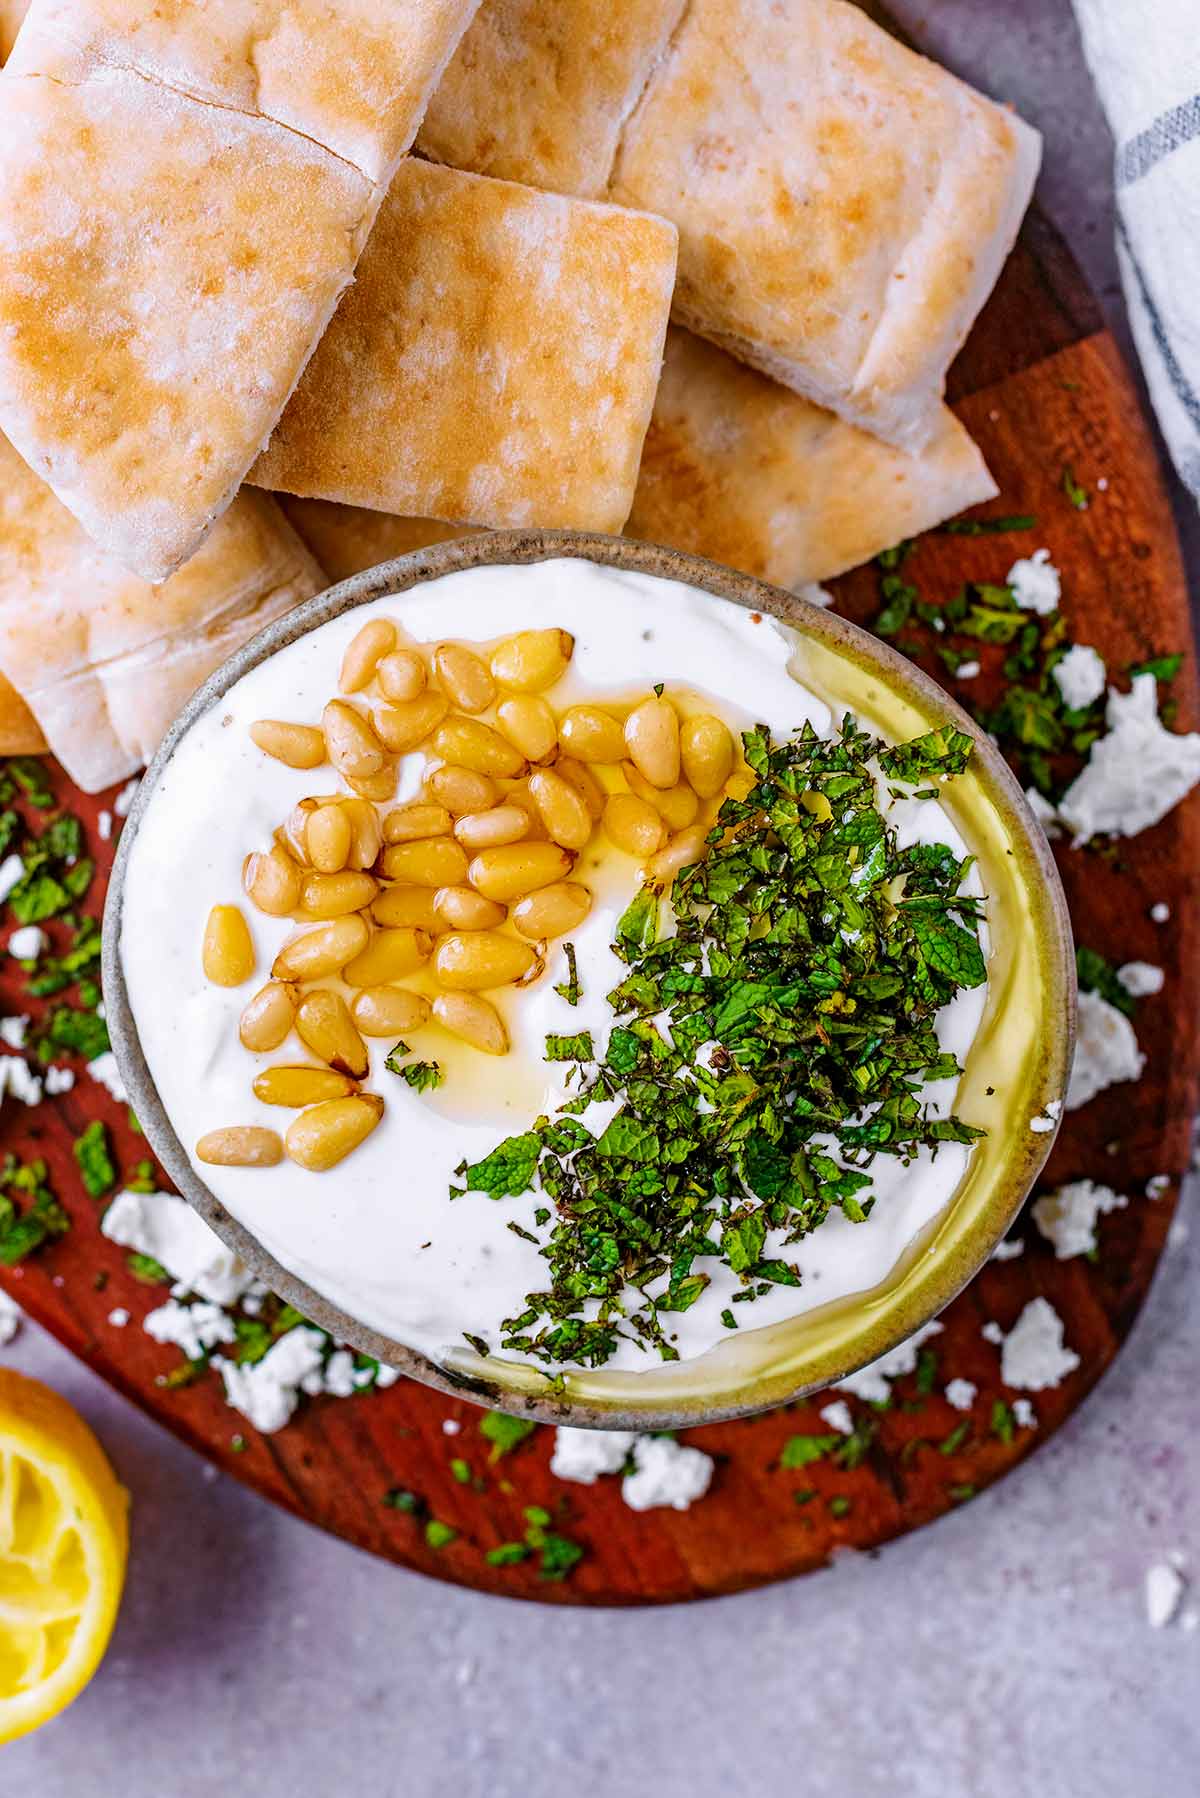 A bowl of feta dip on a board with sliced pita bread.